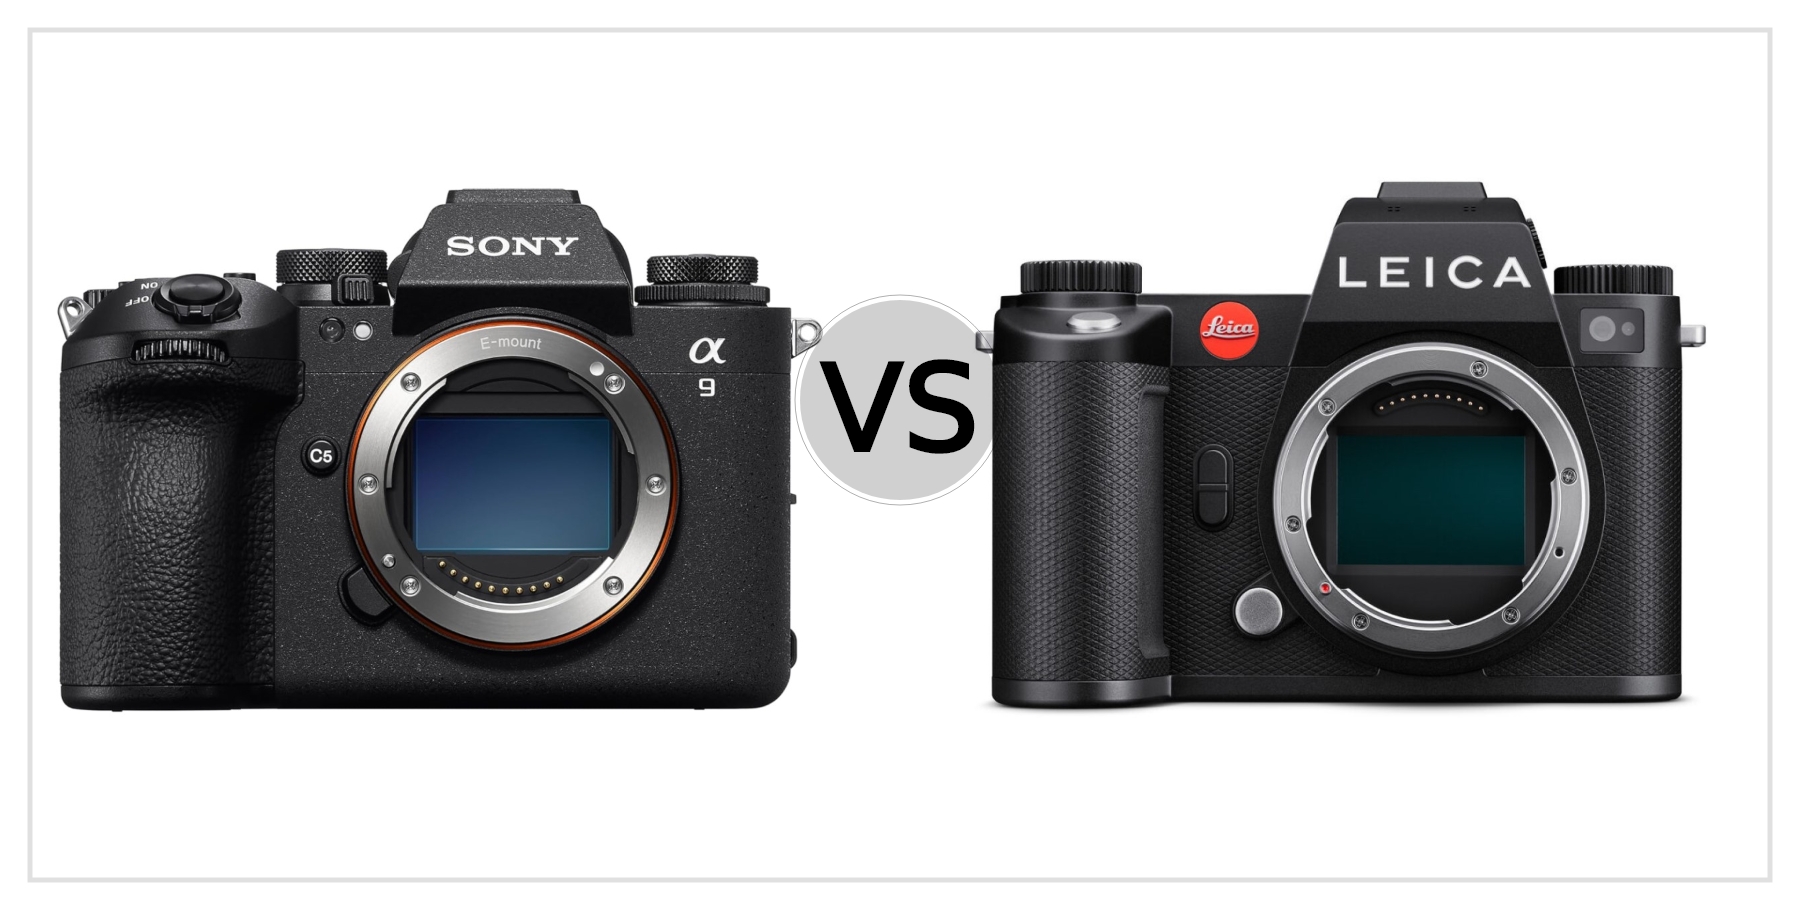 Compare Sony A9 Mark III VS Leica SL3 to see which is better